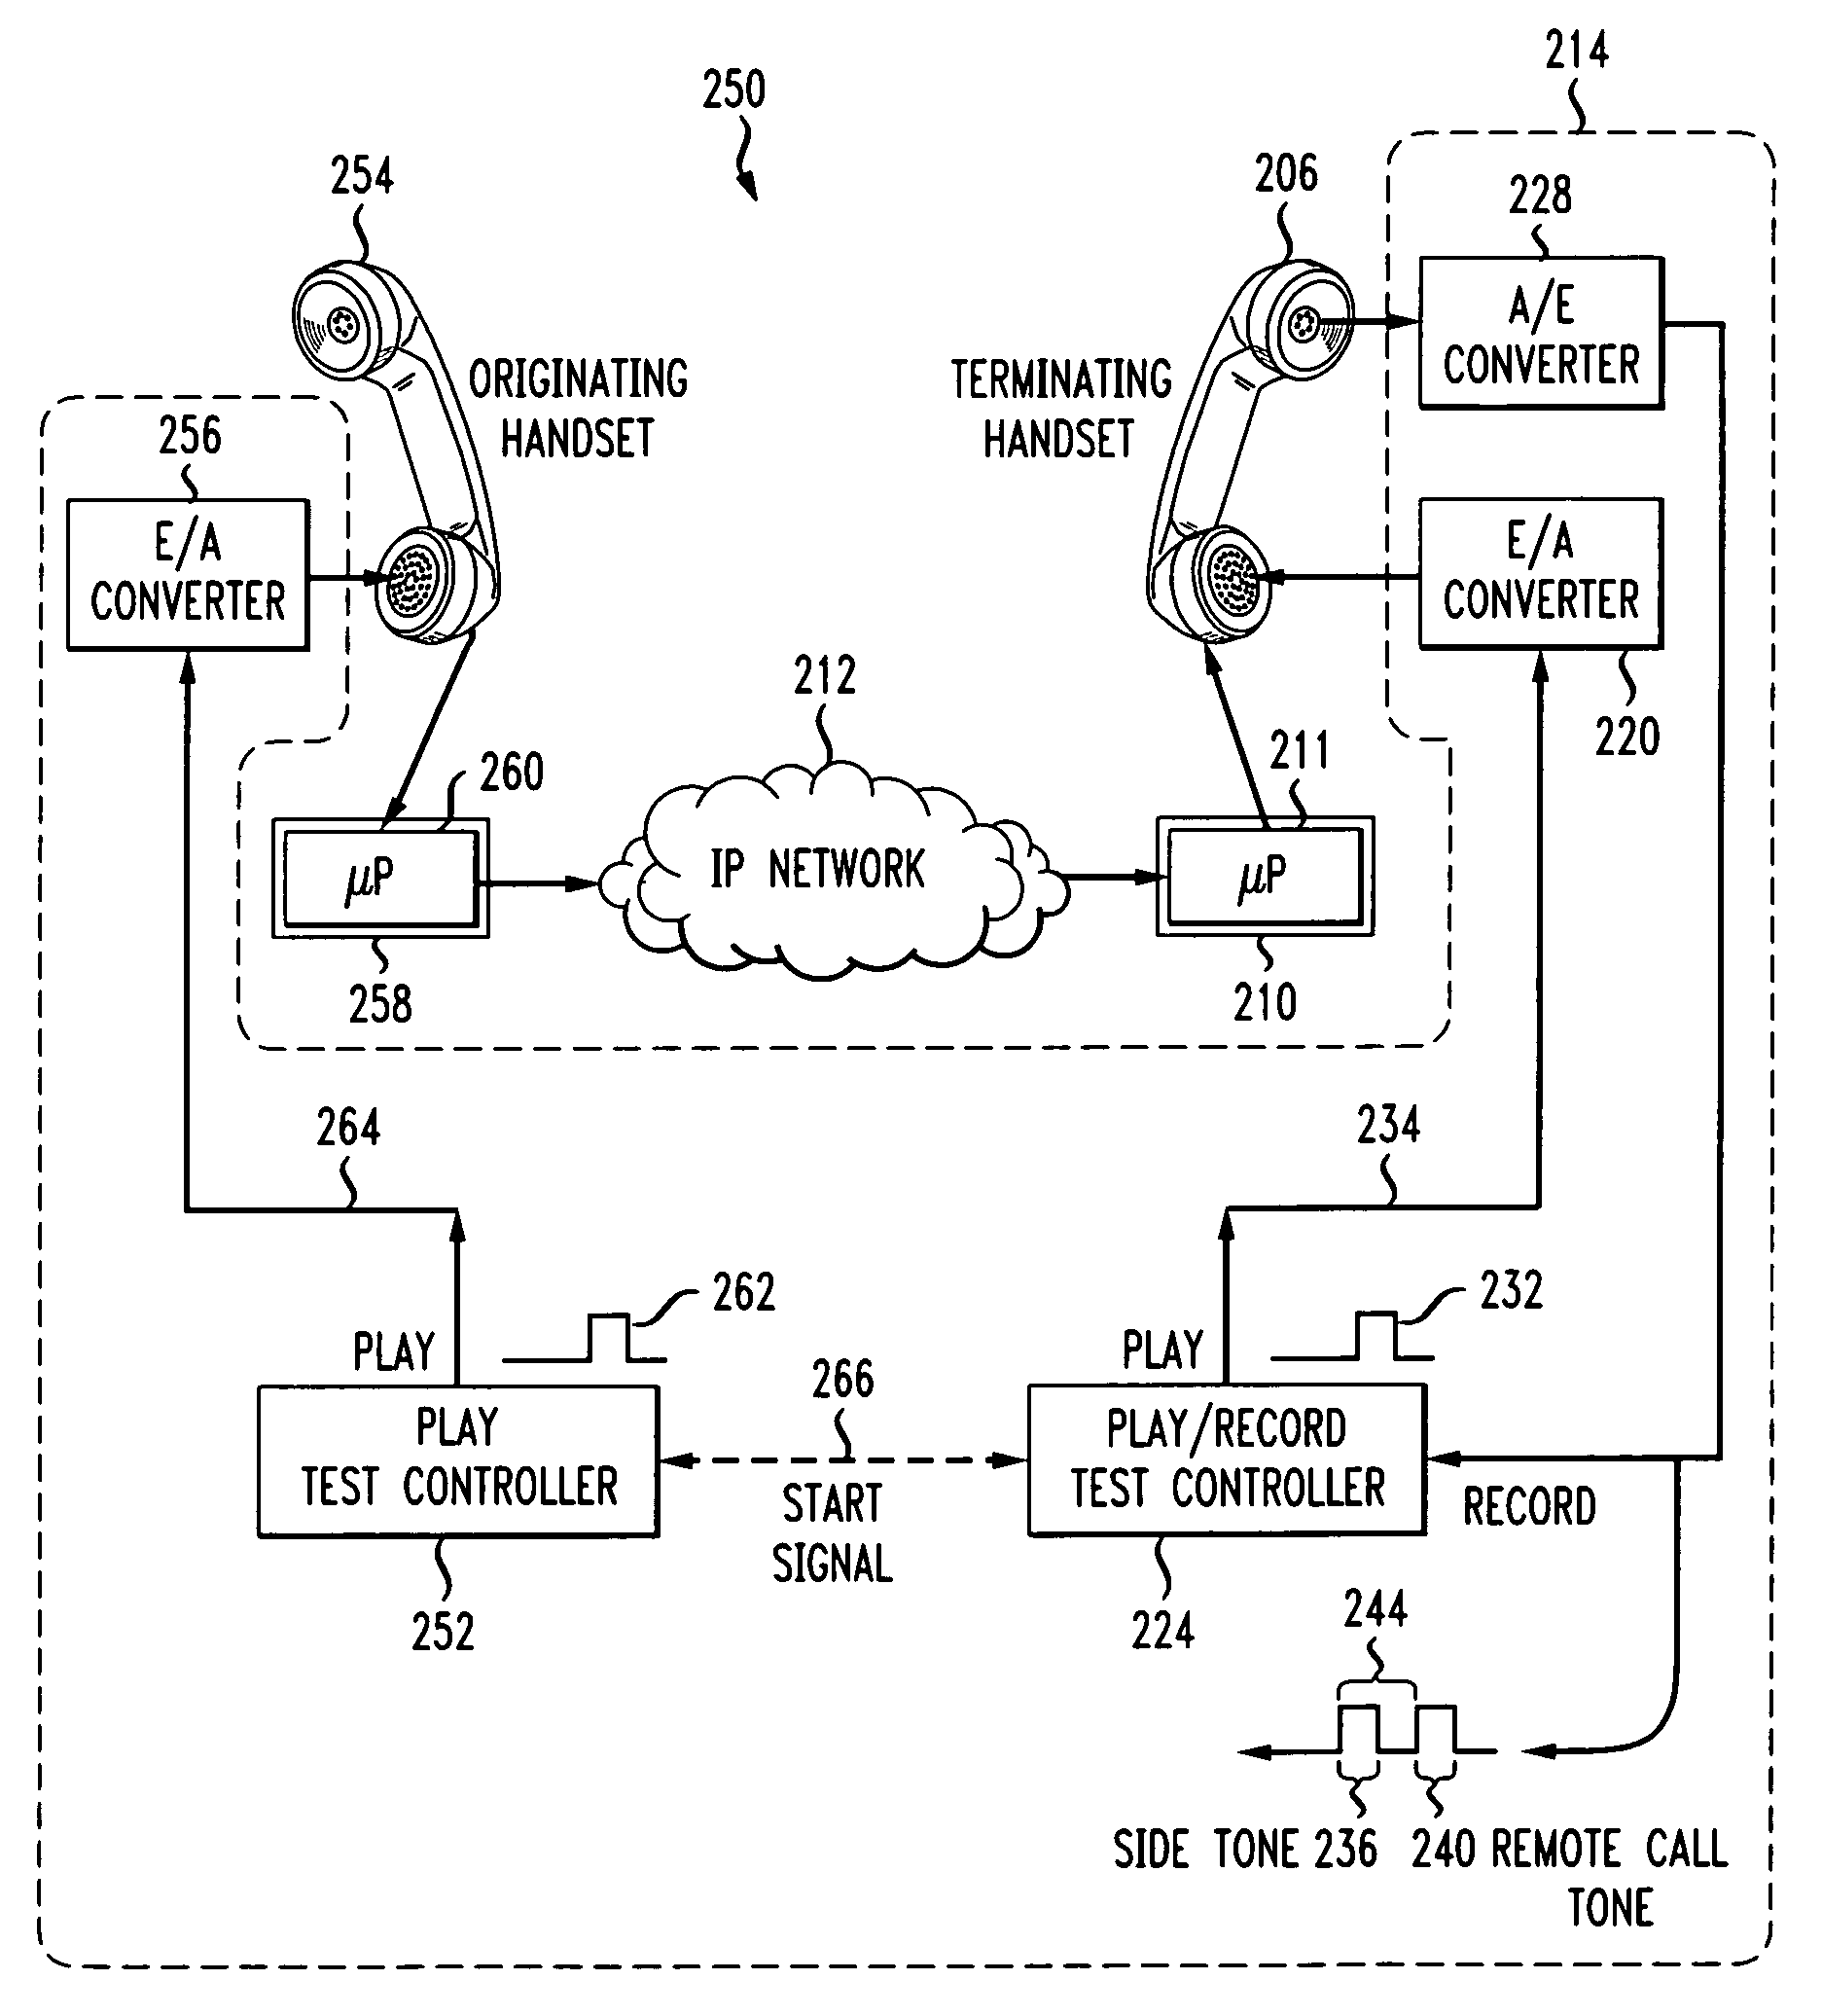 Techniques and apparatus for one way transmission delay measurement for IP phone connections